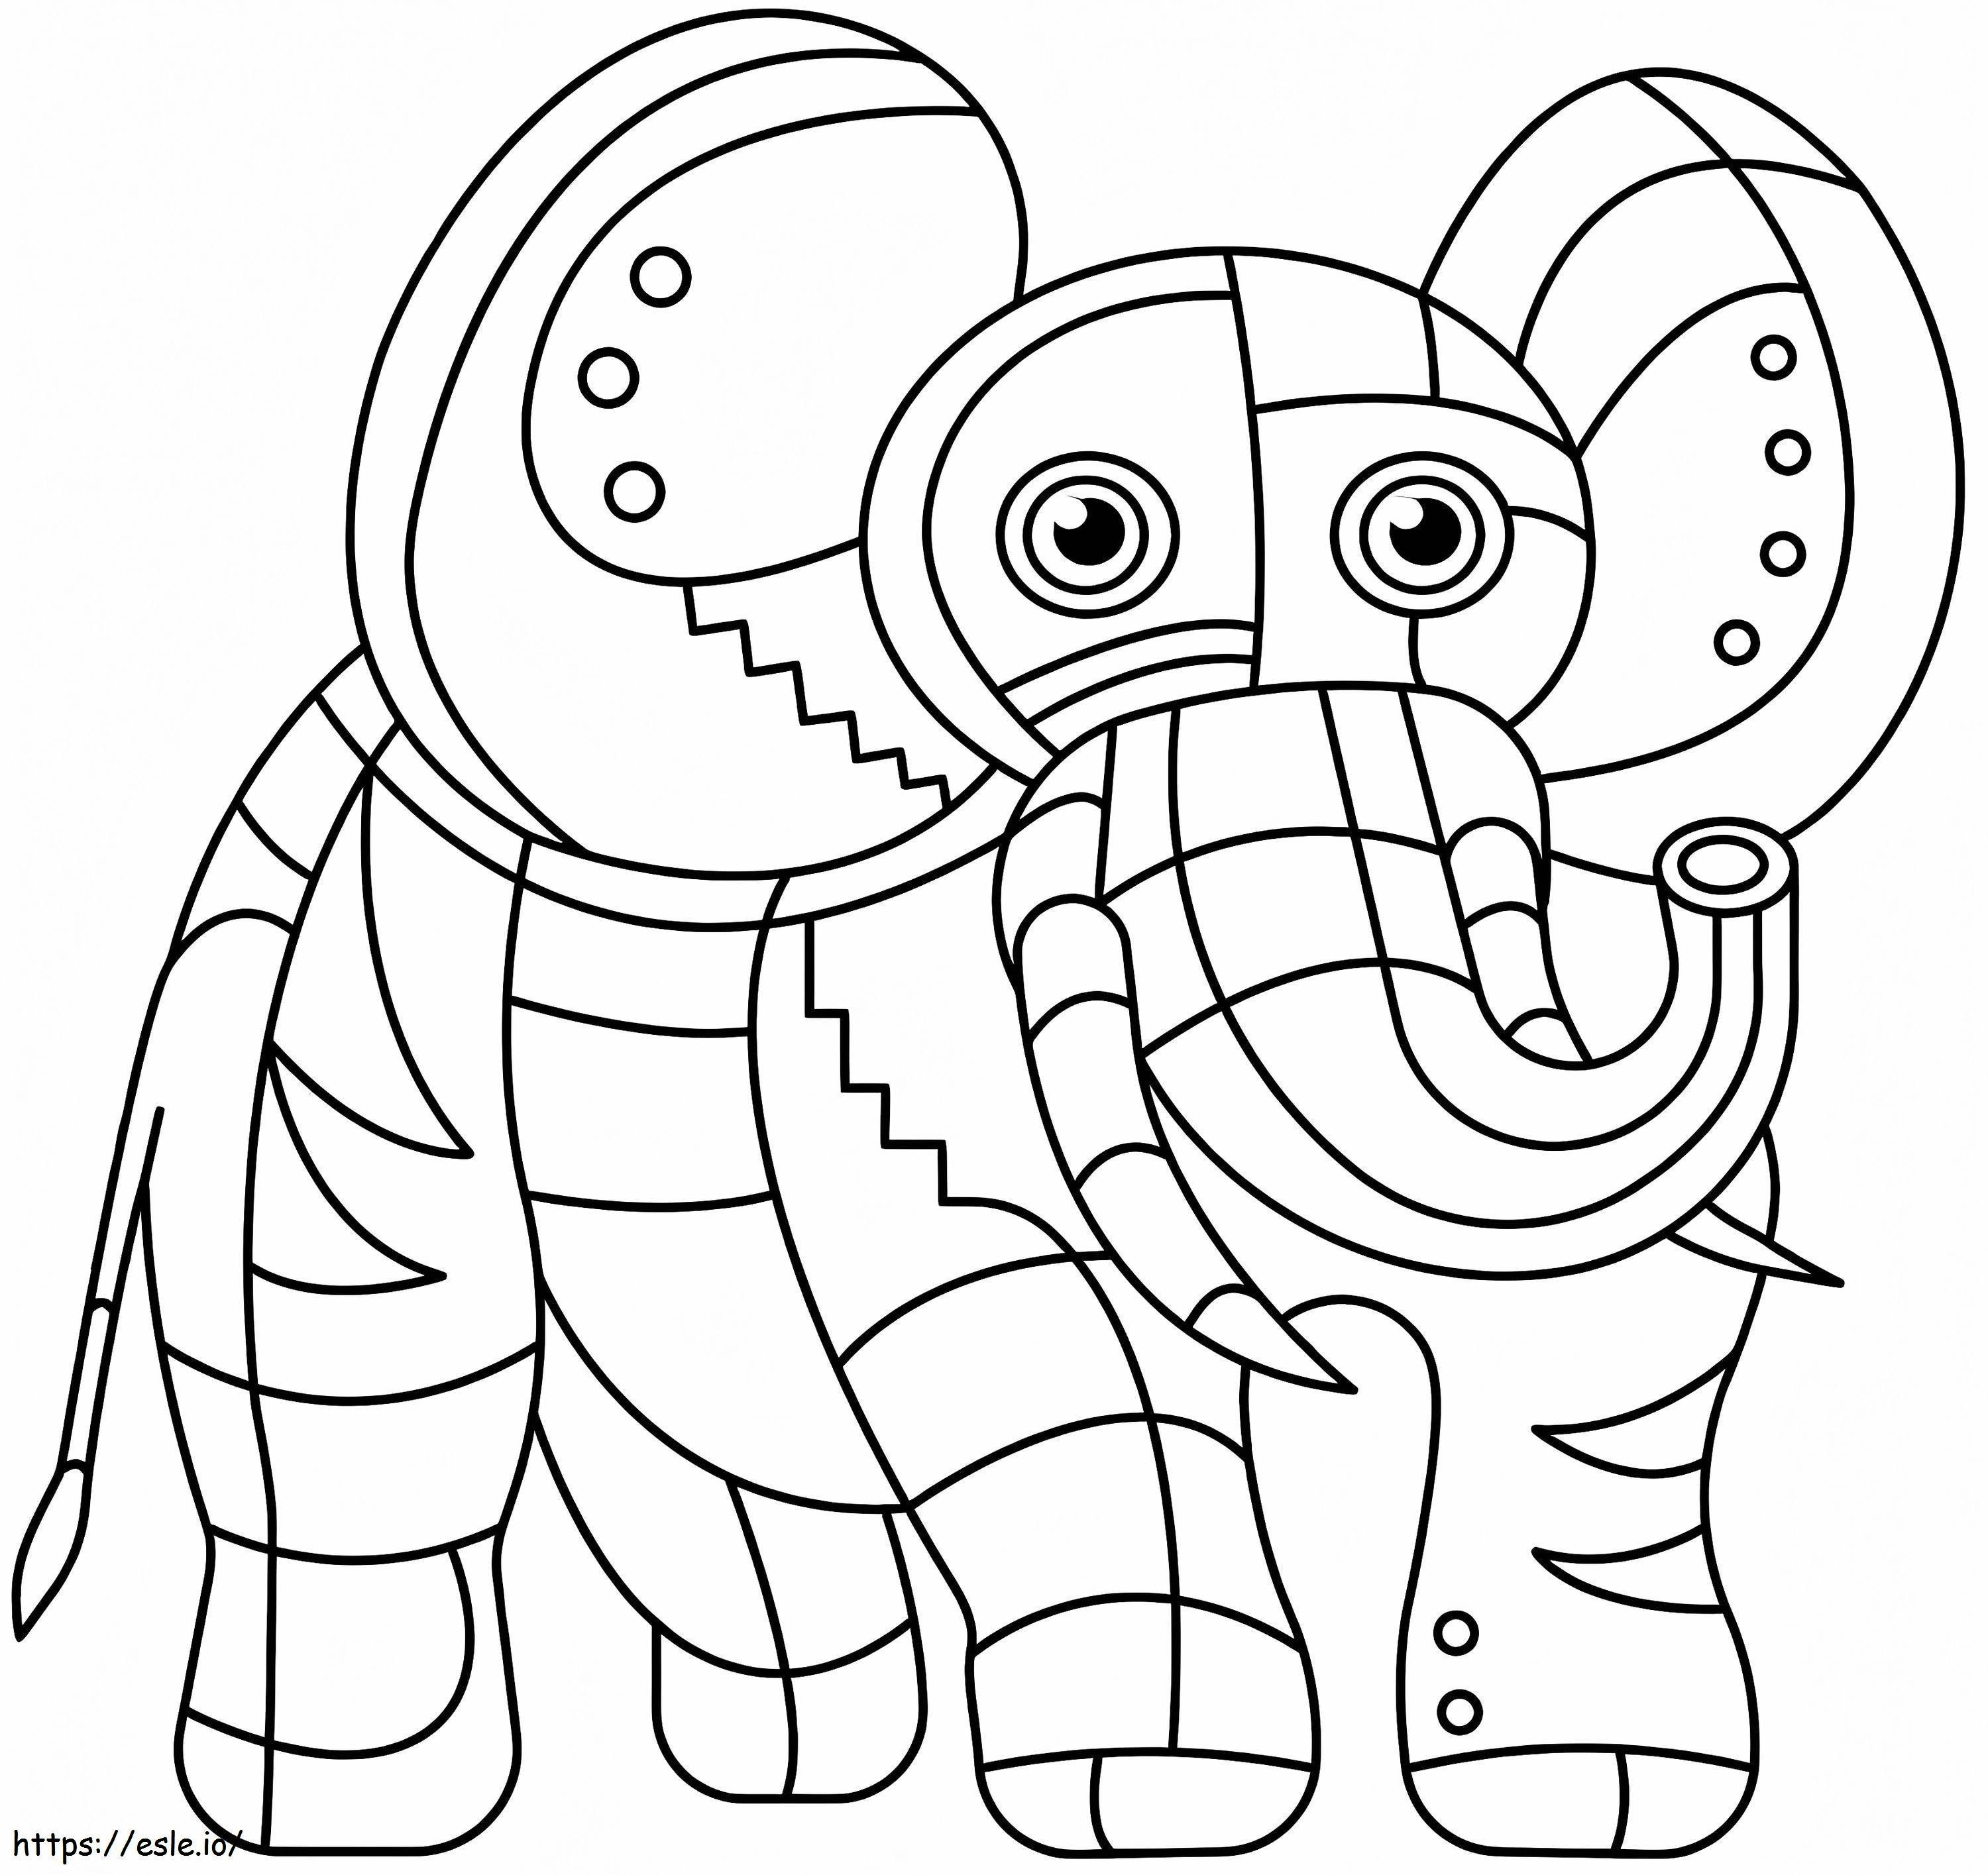 Abstract Elephant coloring page